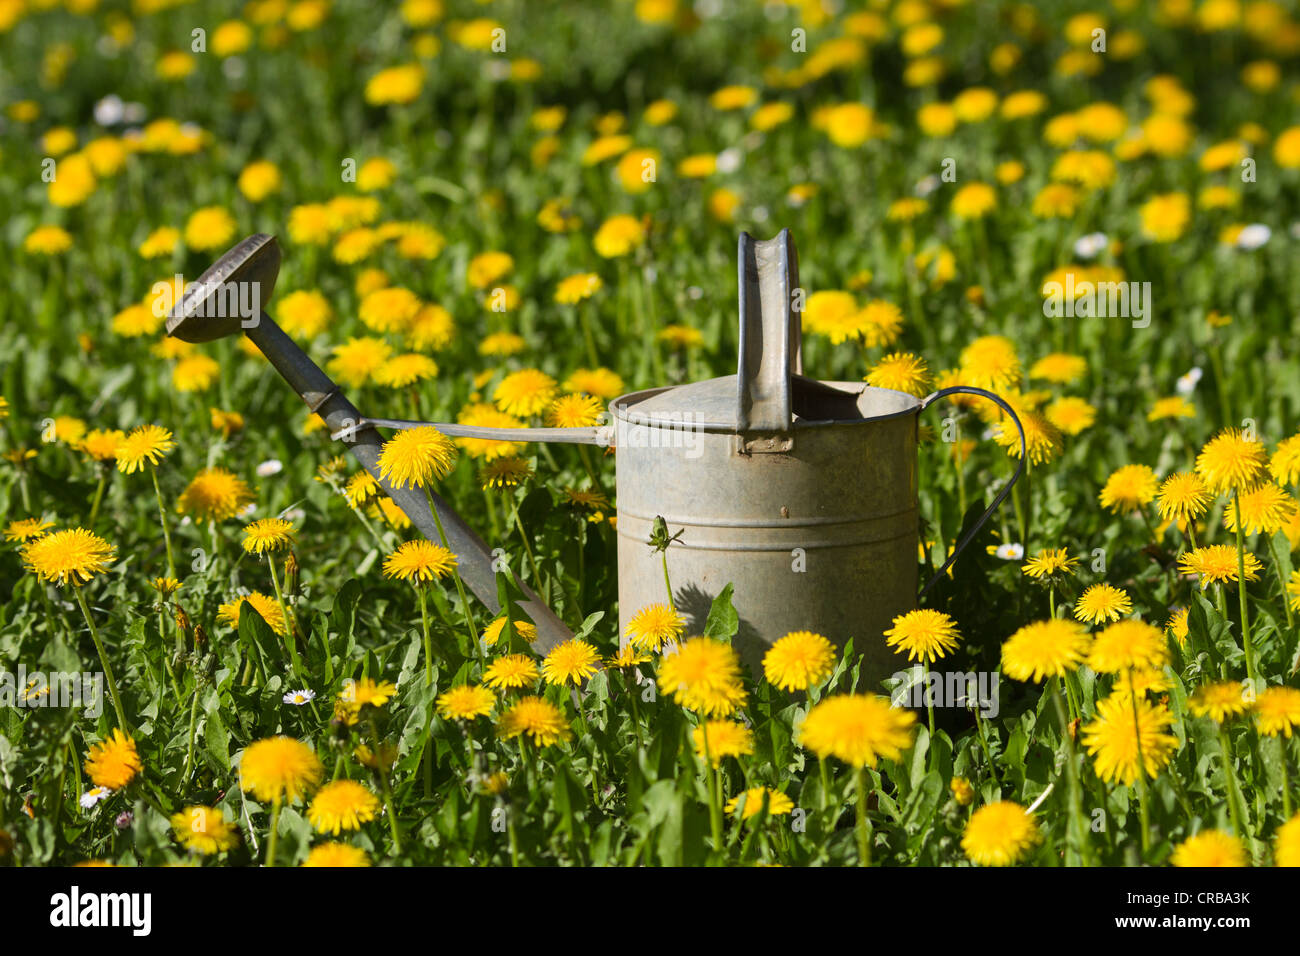 Tin watering can in a dandelion meadow Stock Photo